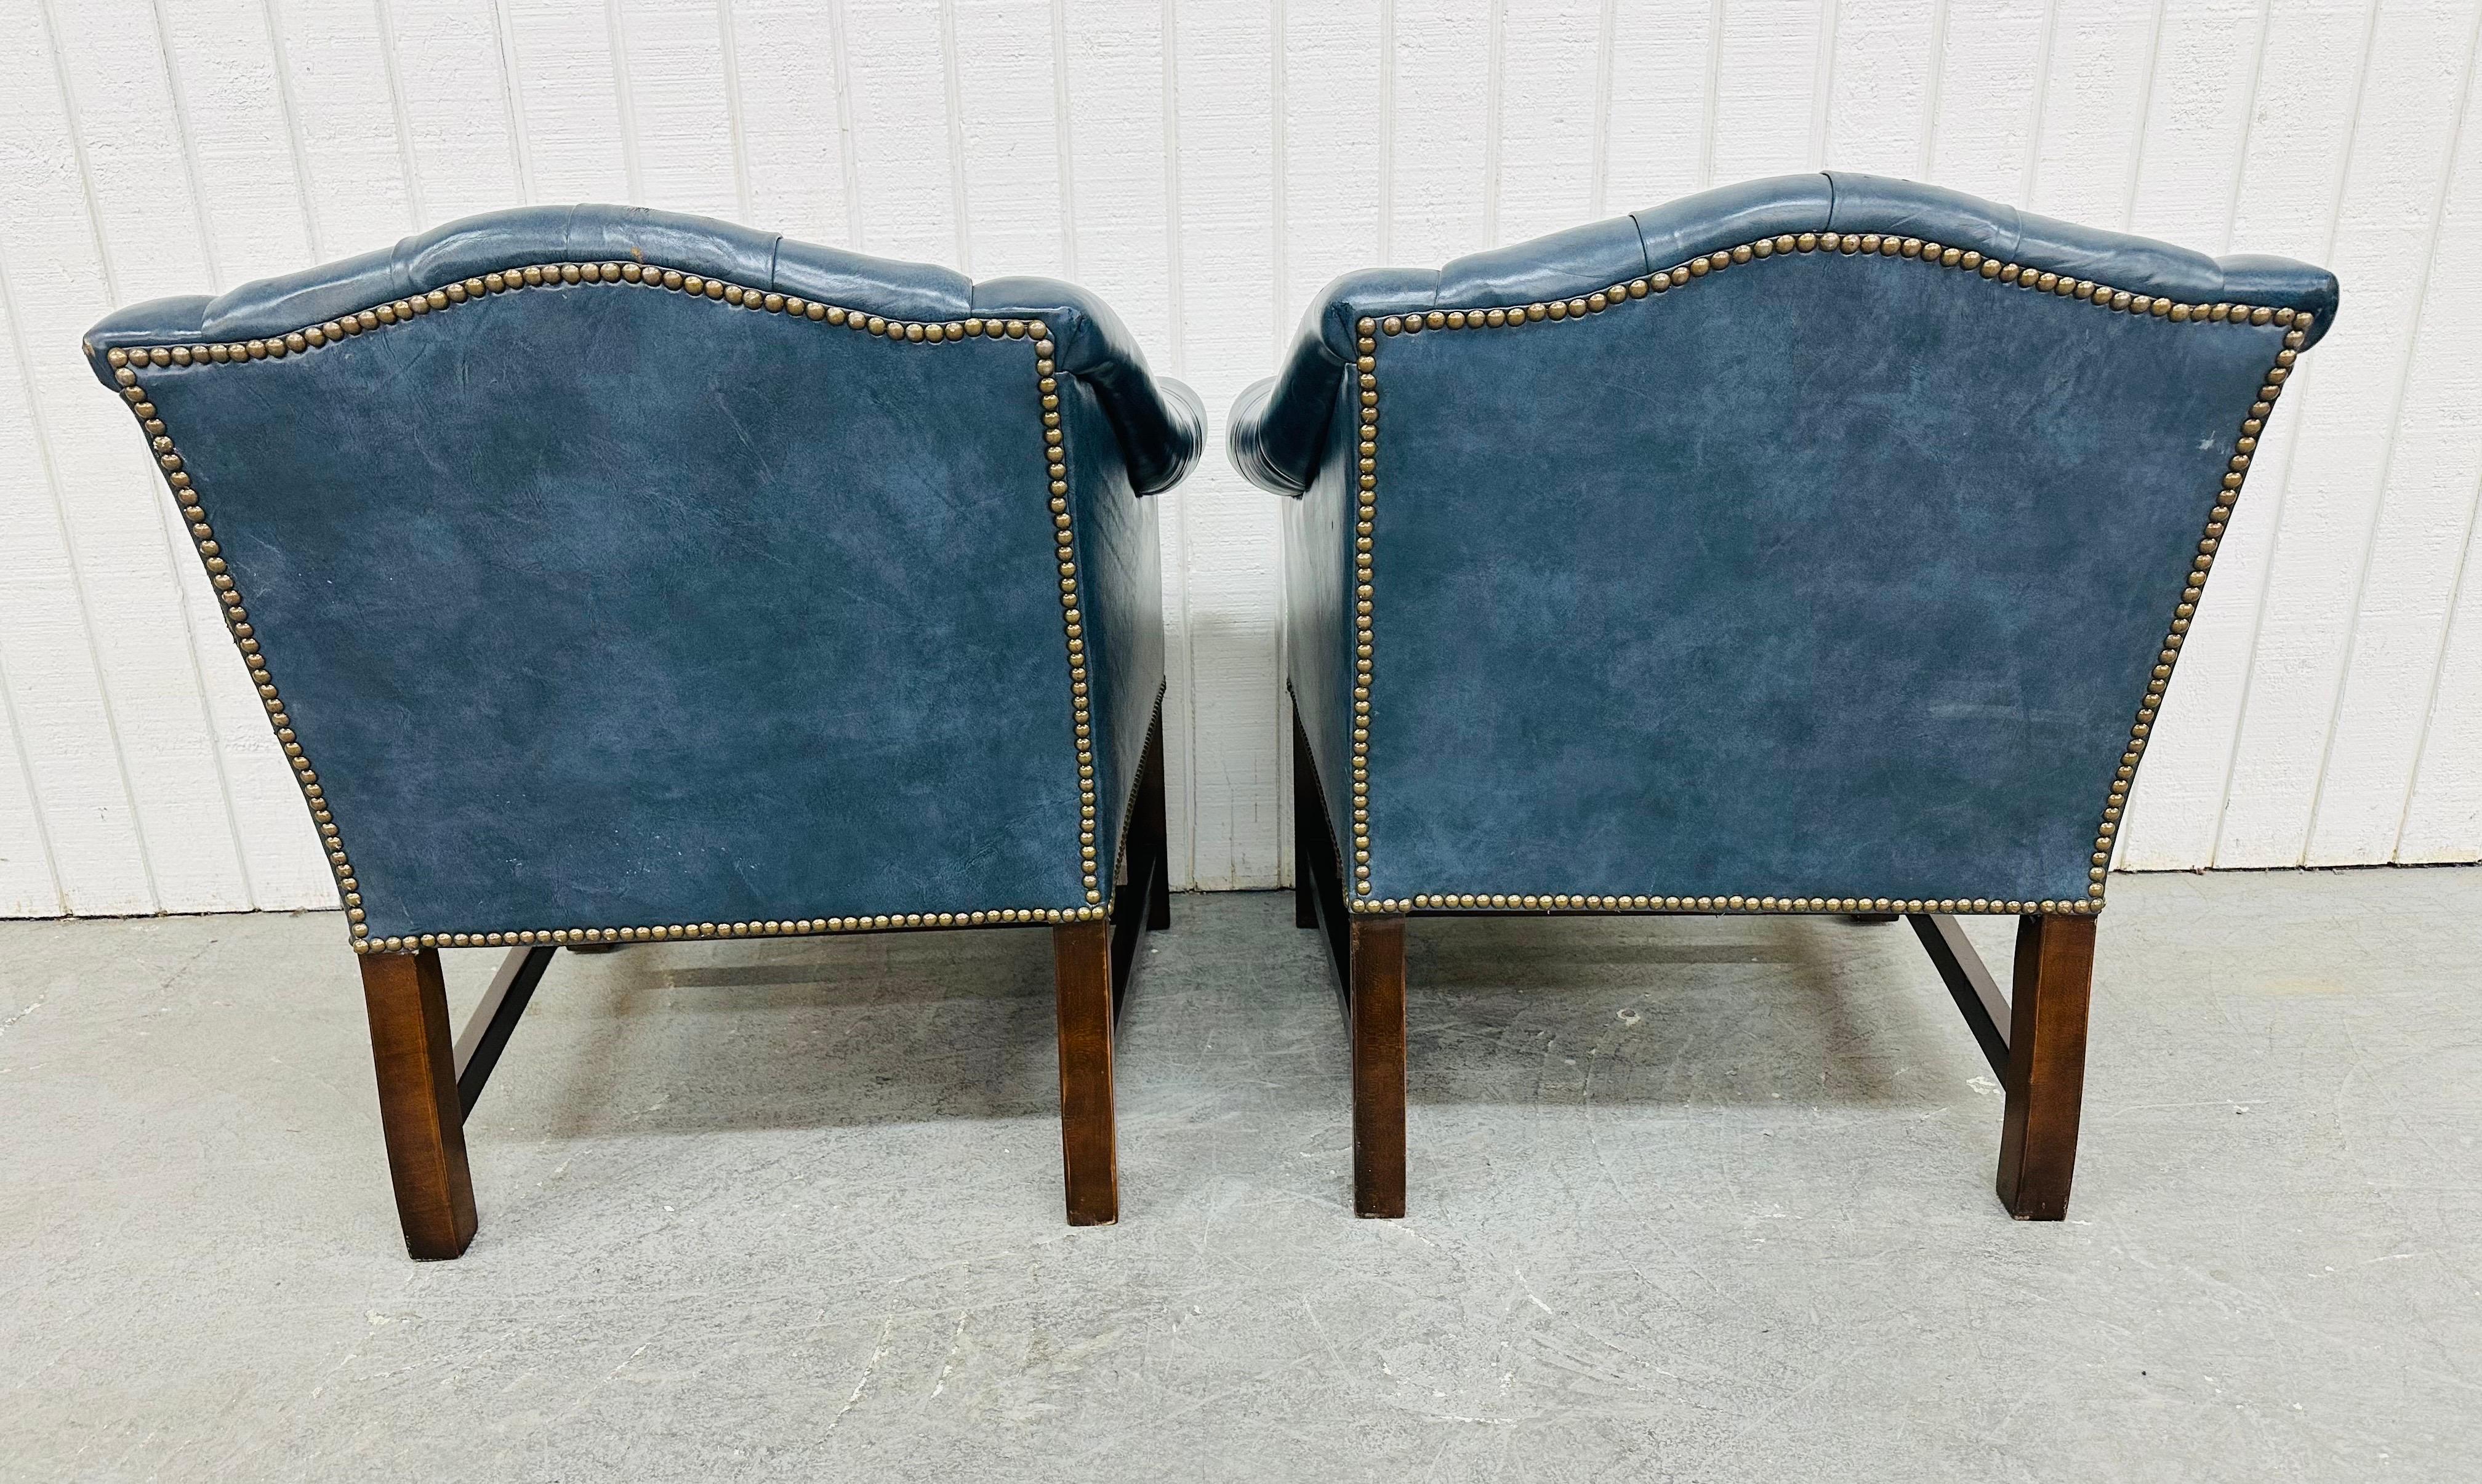 Vintage Blue Chesterfield Arm Chairs - Set of 2 1